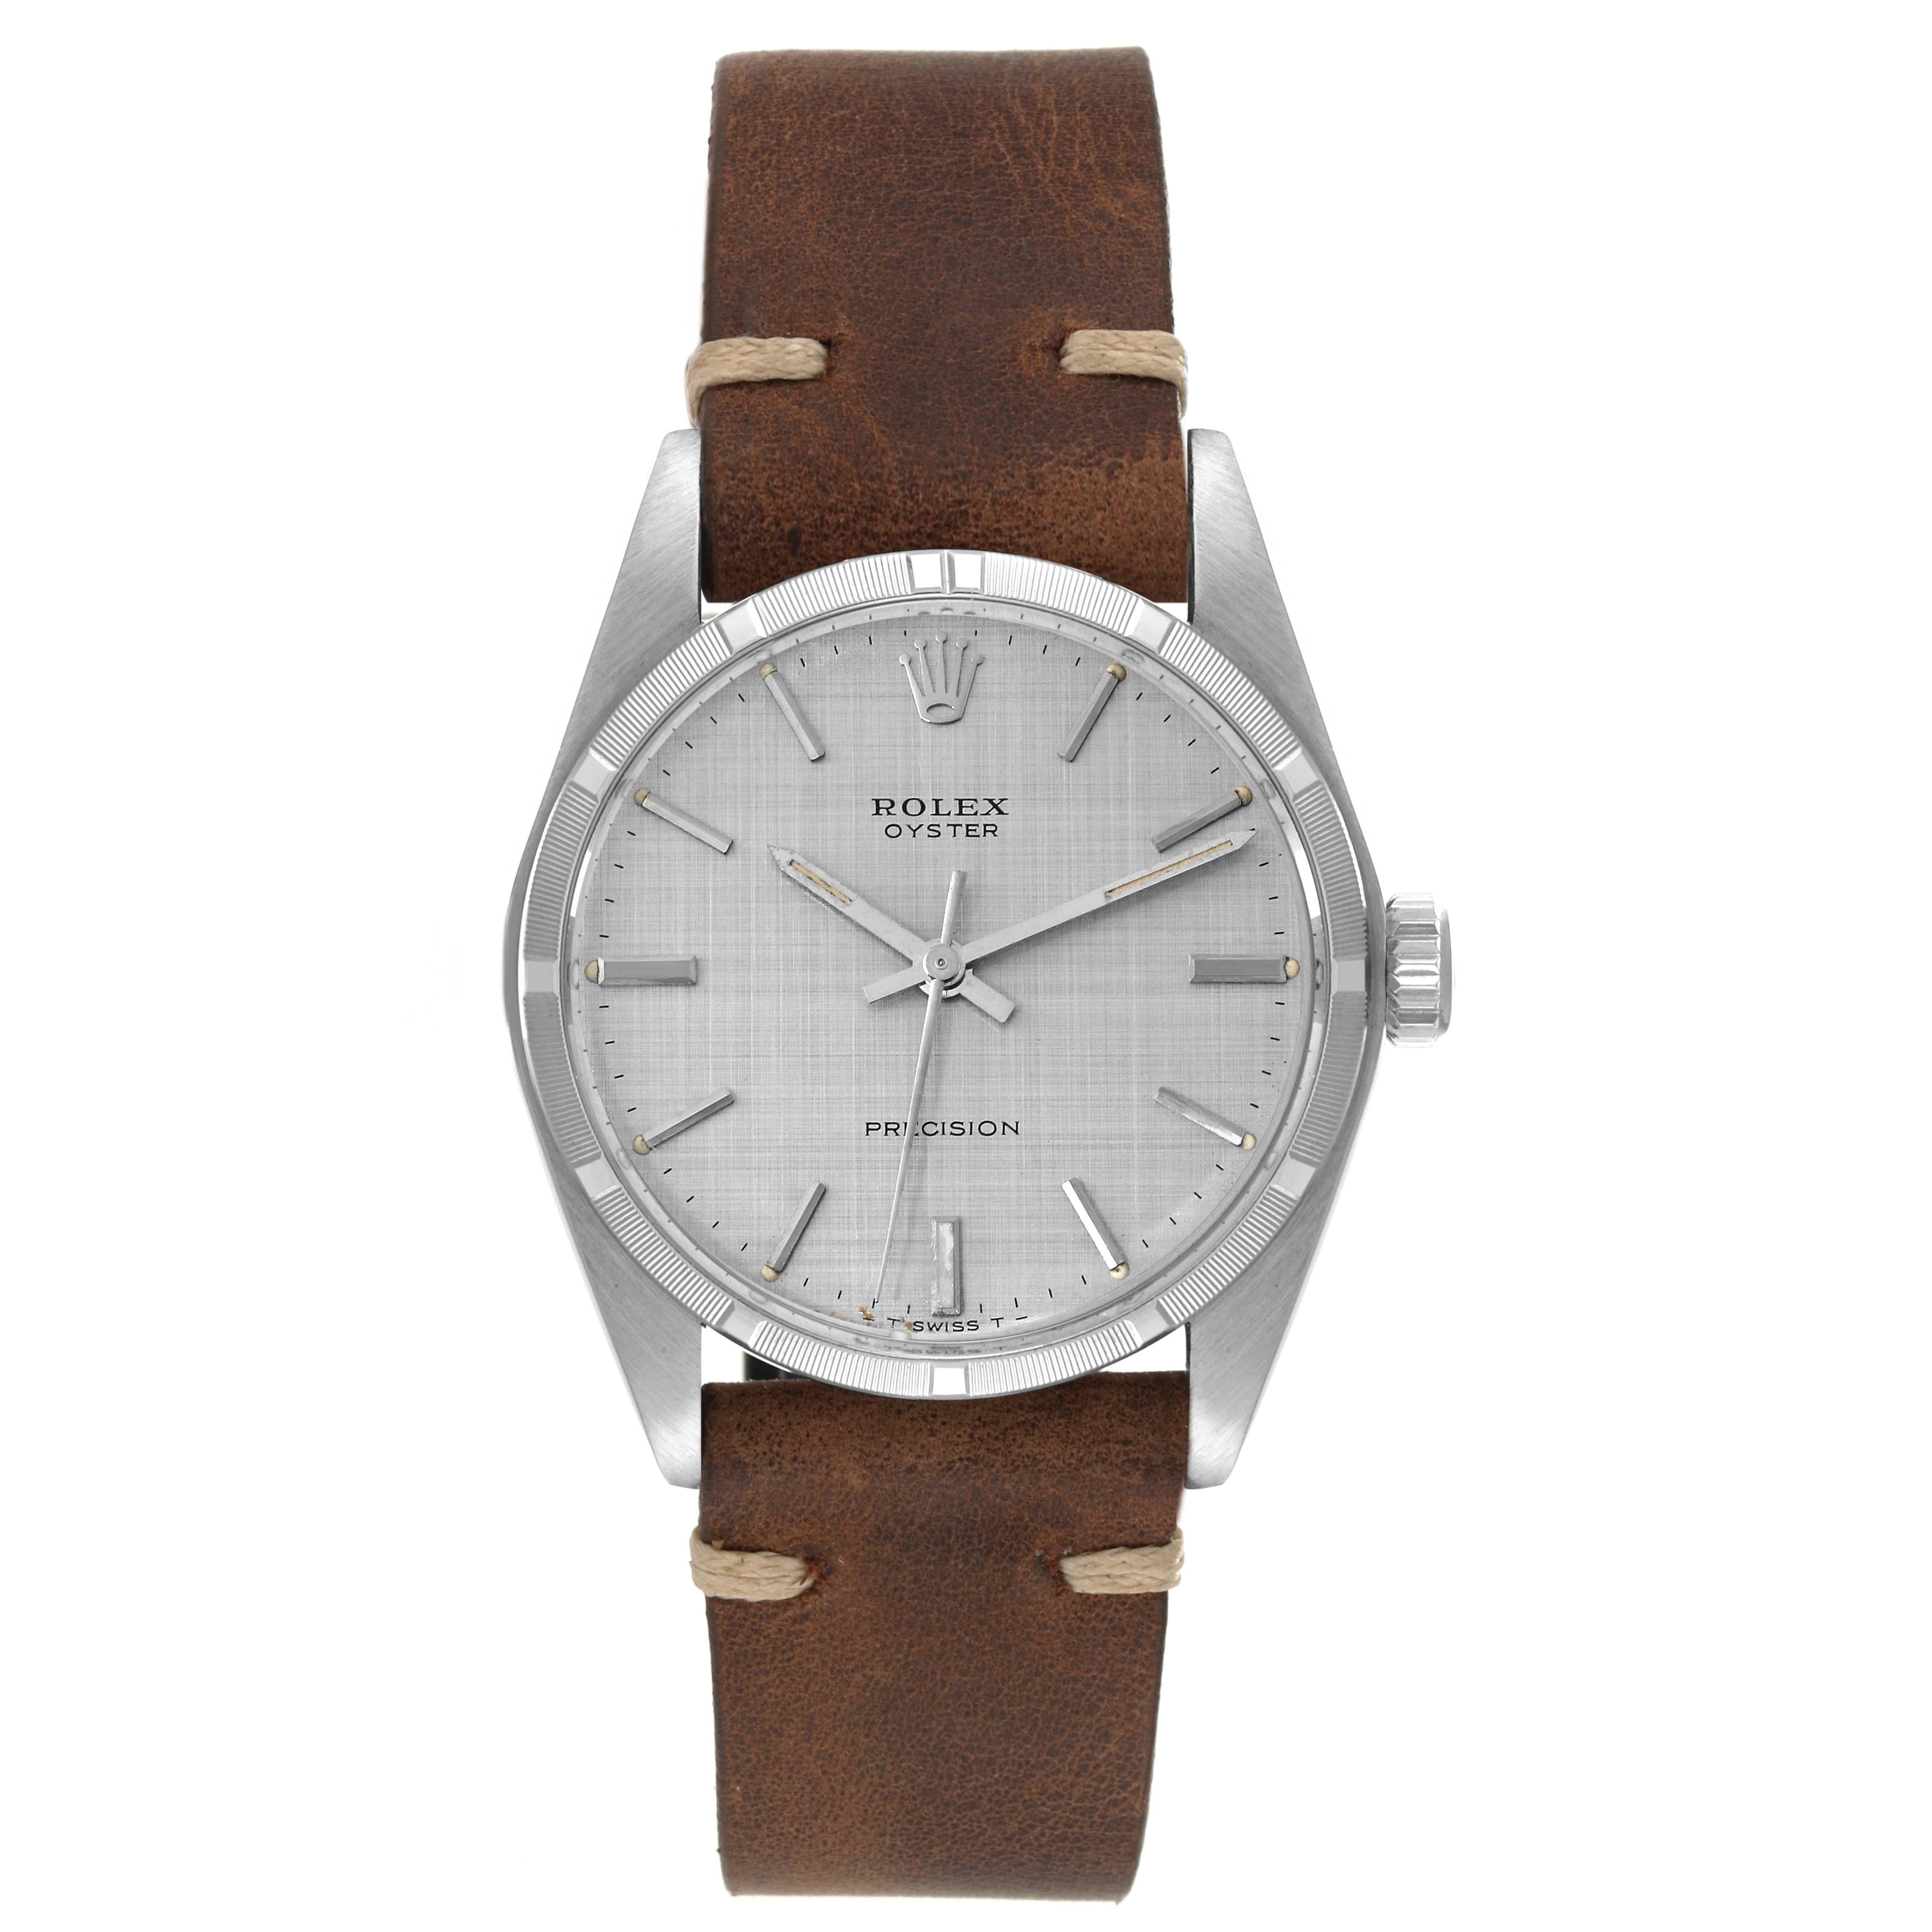 Rolex Oyster Precision Silver Linen Dial Vintage Steel Mens Watch 6427. Manual-winding movement. Stainless steel oyster case 35.0 mm in diameter. Rolex logo on the crown. Stainless steel engine turned bezel. Domed acrylic crystal. Silver linen dial